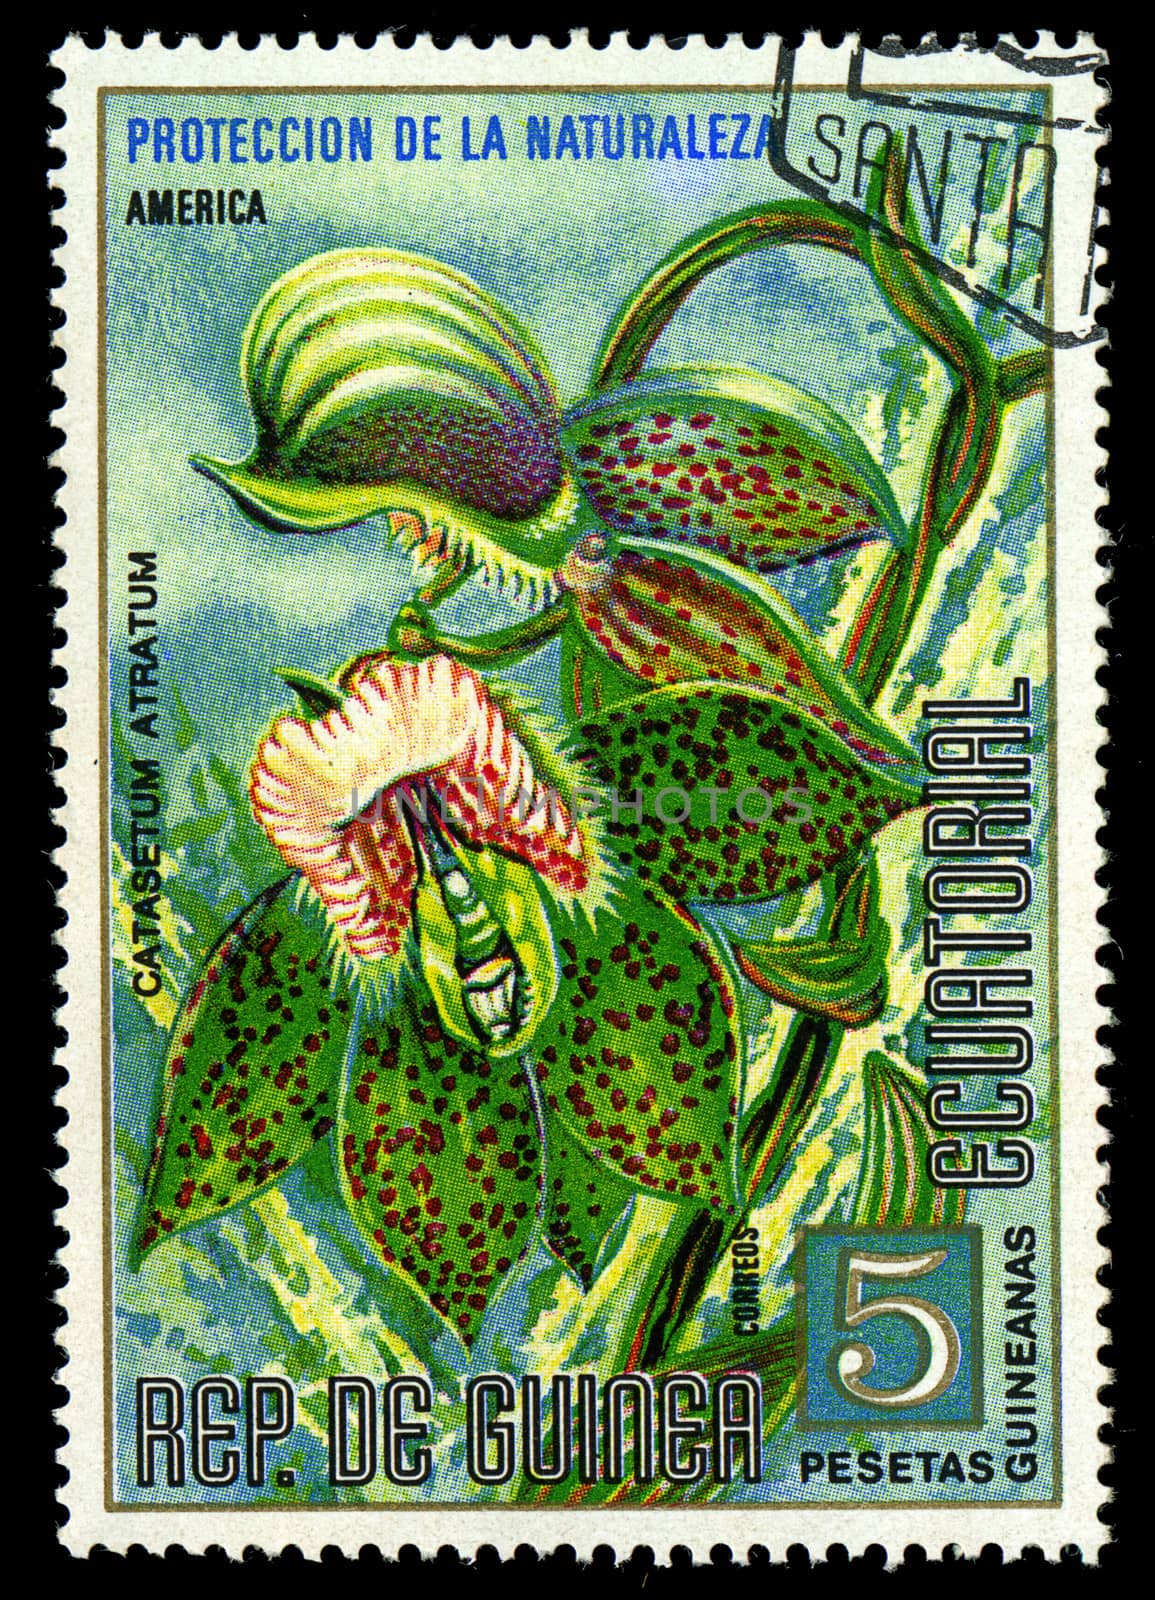 EQUATORIAL GUINEA - CIRCA 1974: A stamp printed in Equatorial Guinea shows Catasetum Atratum, series is devoted to flowers, circa 1974 by Zhukow